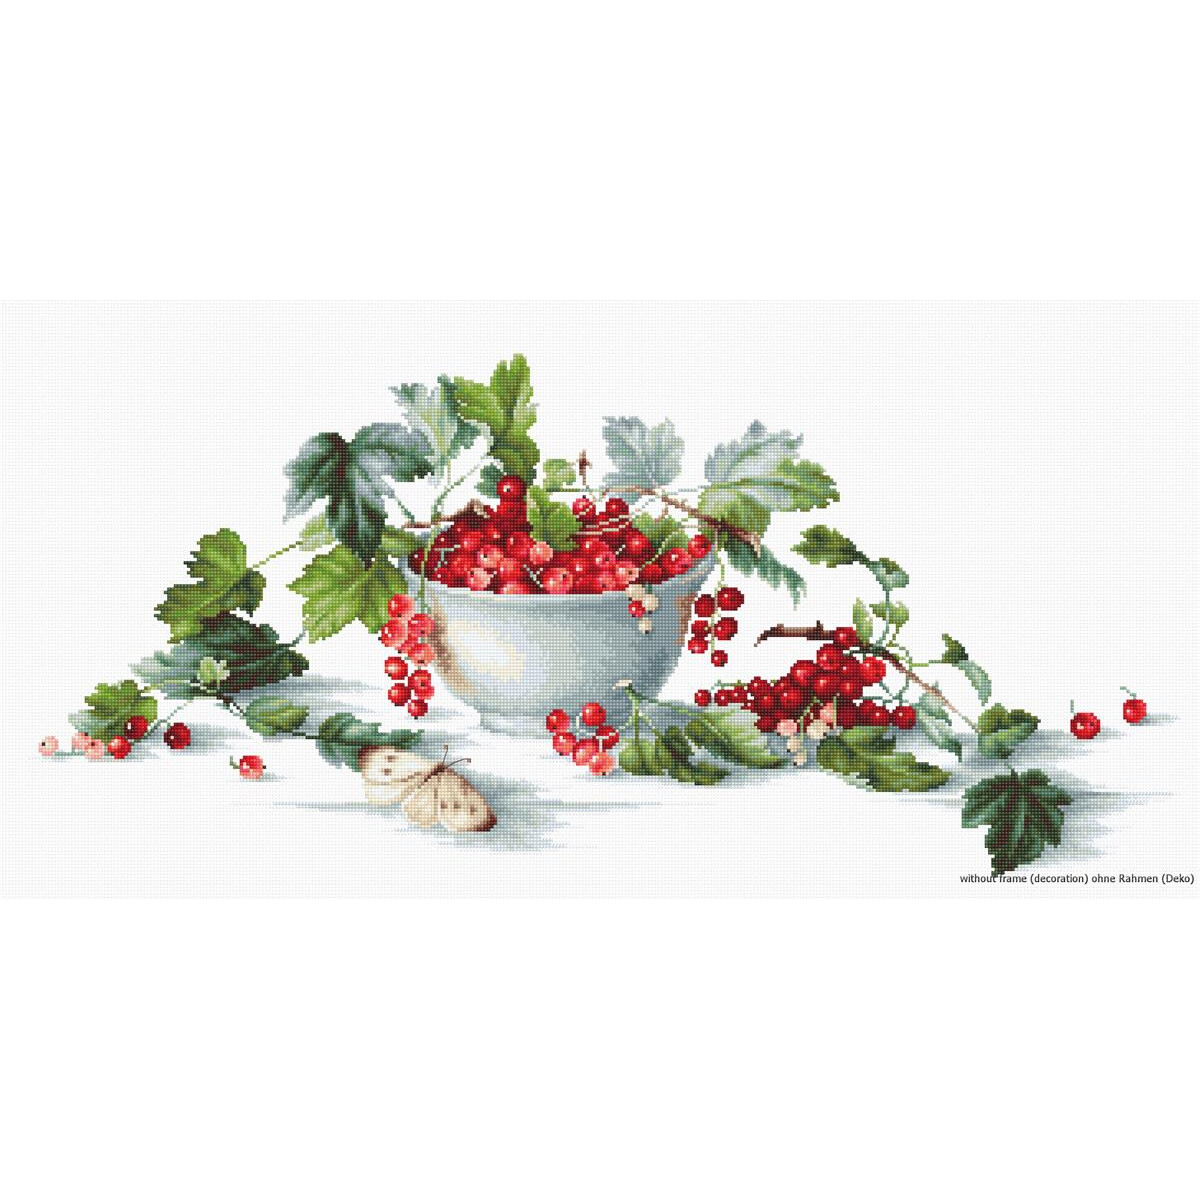 Luca-S counted Cross Stitch kit "Red Currants...